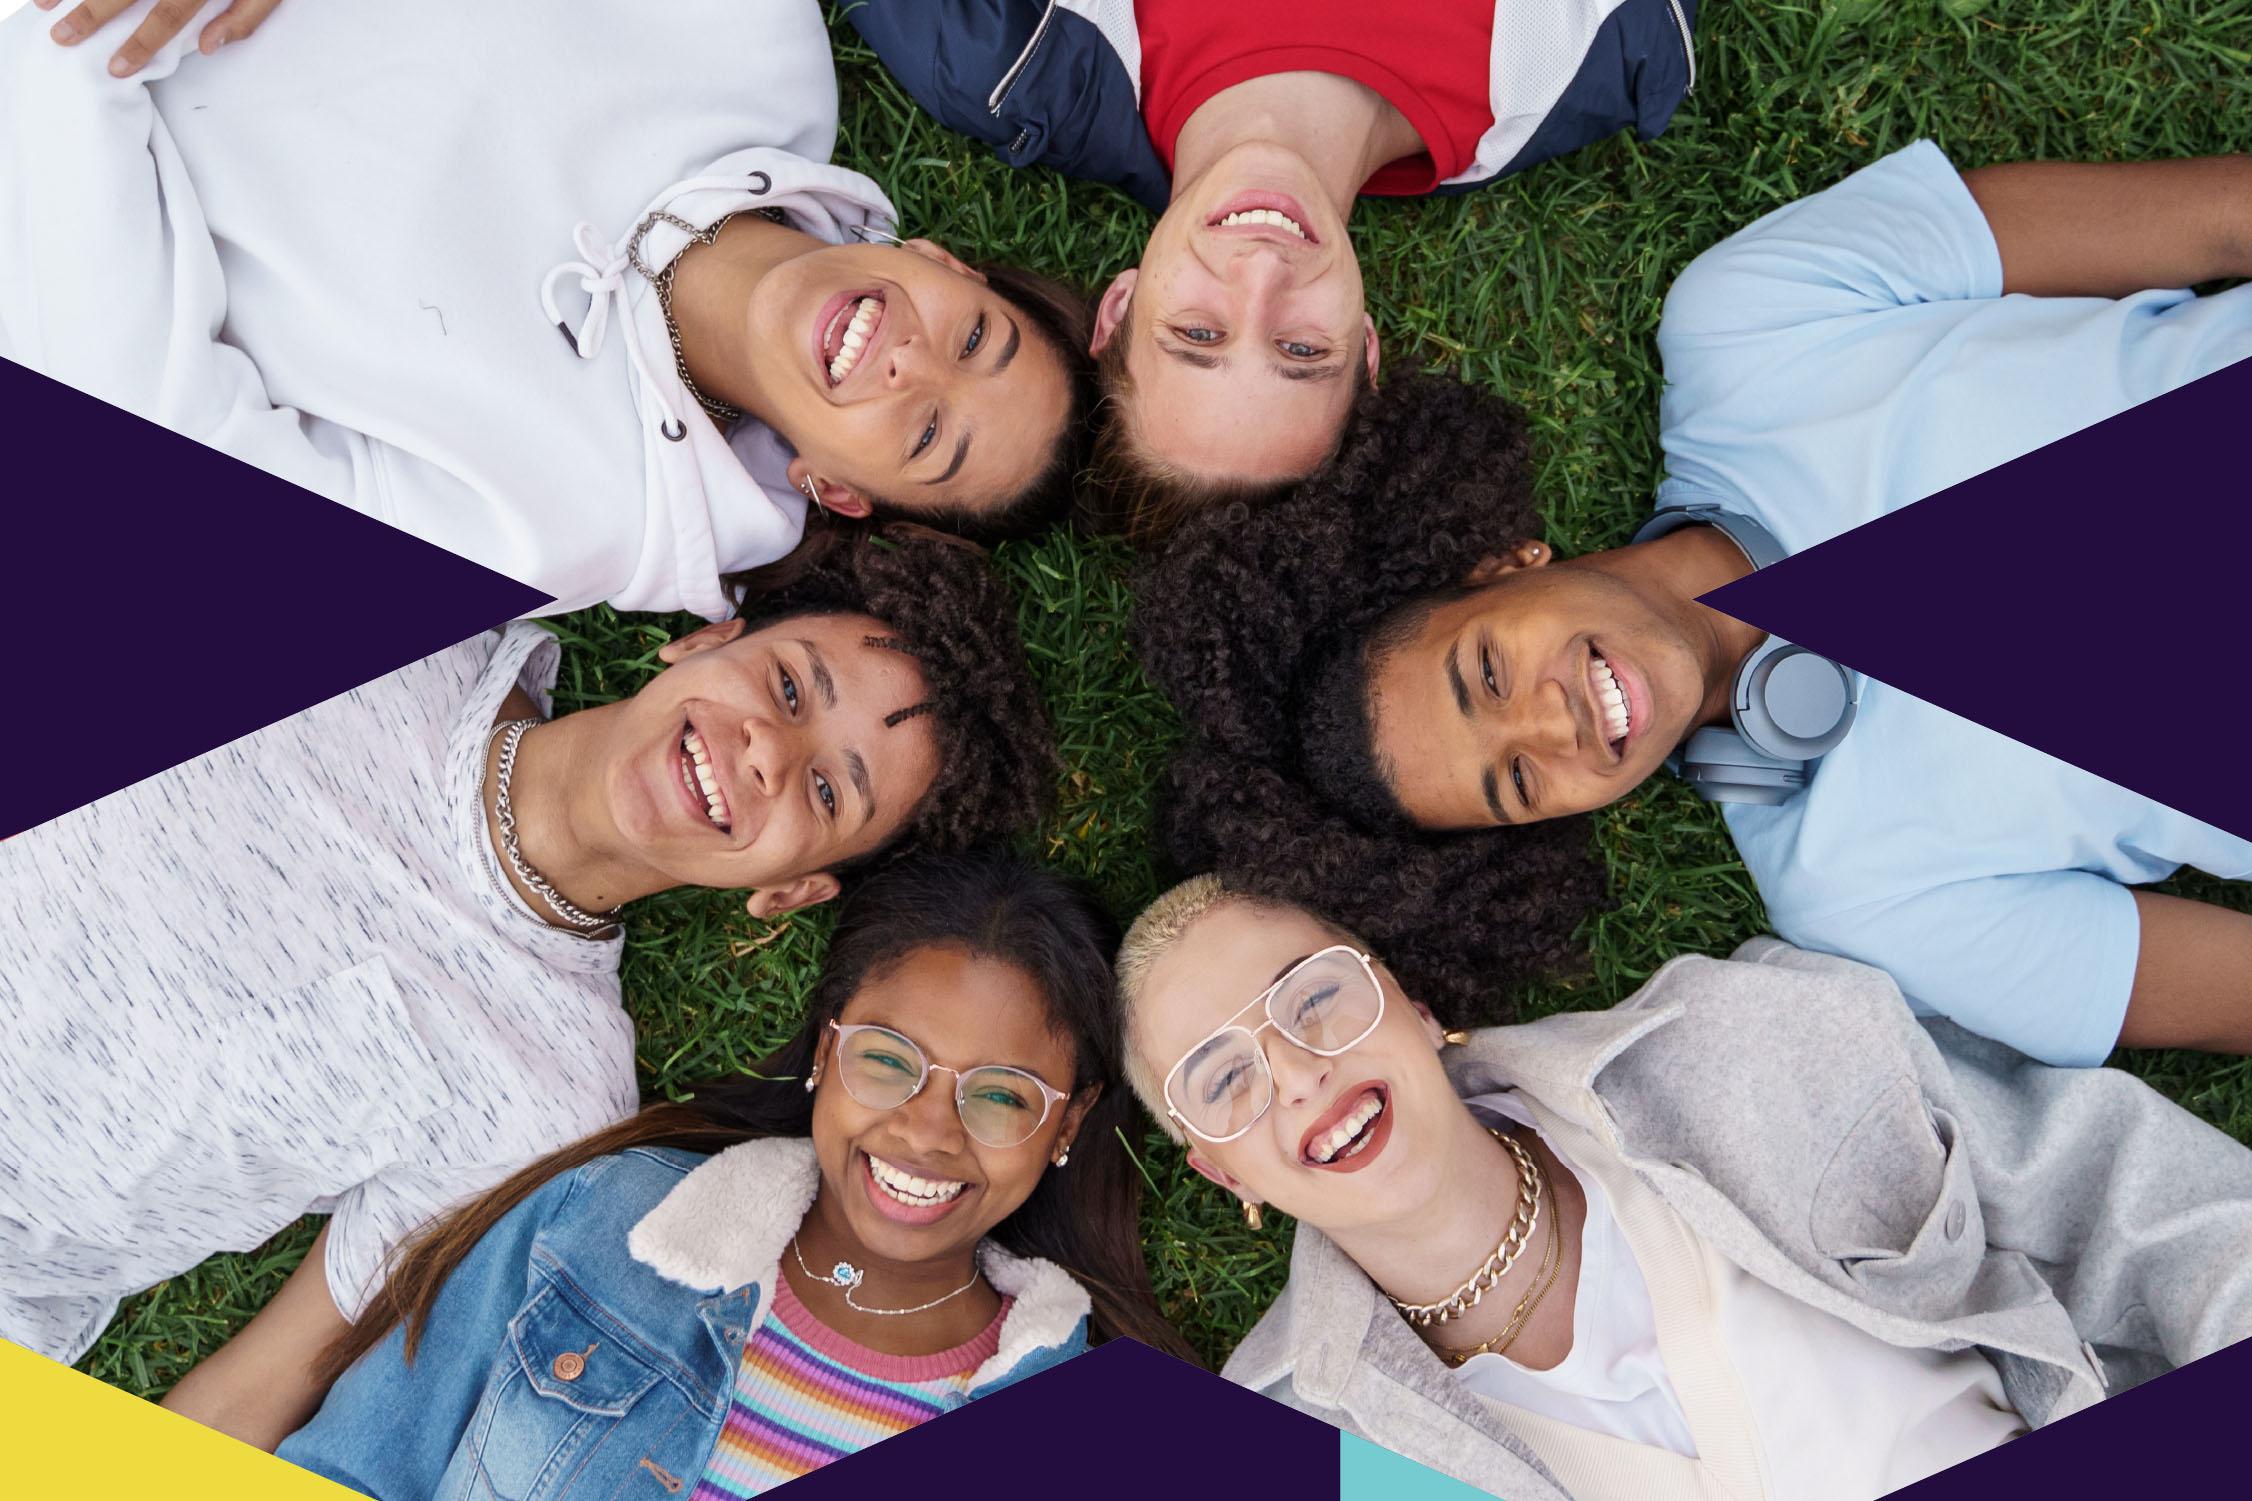 Six young people lay on the ground in a circle with their heads touching, looking up and smiling